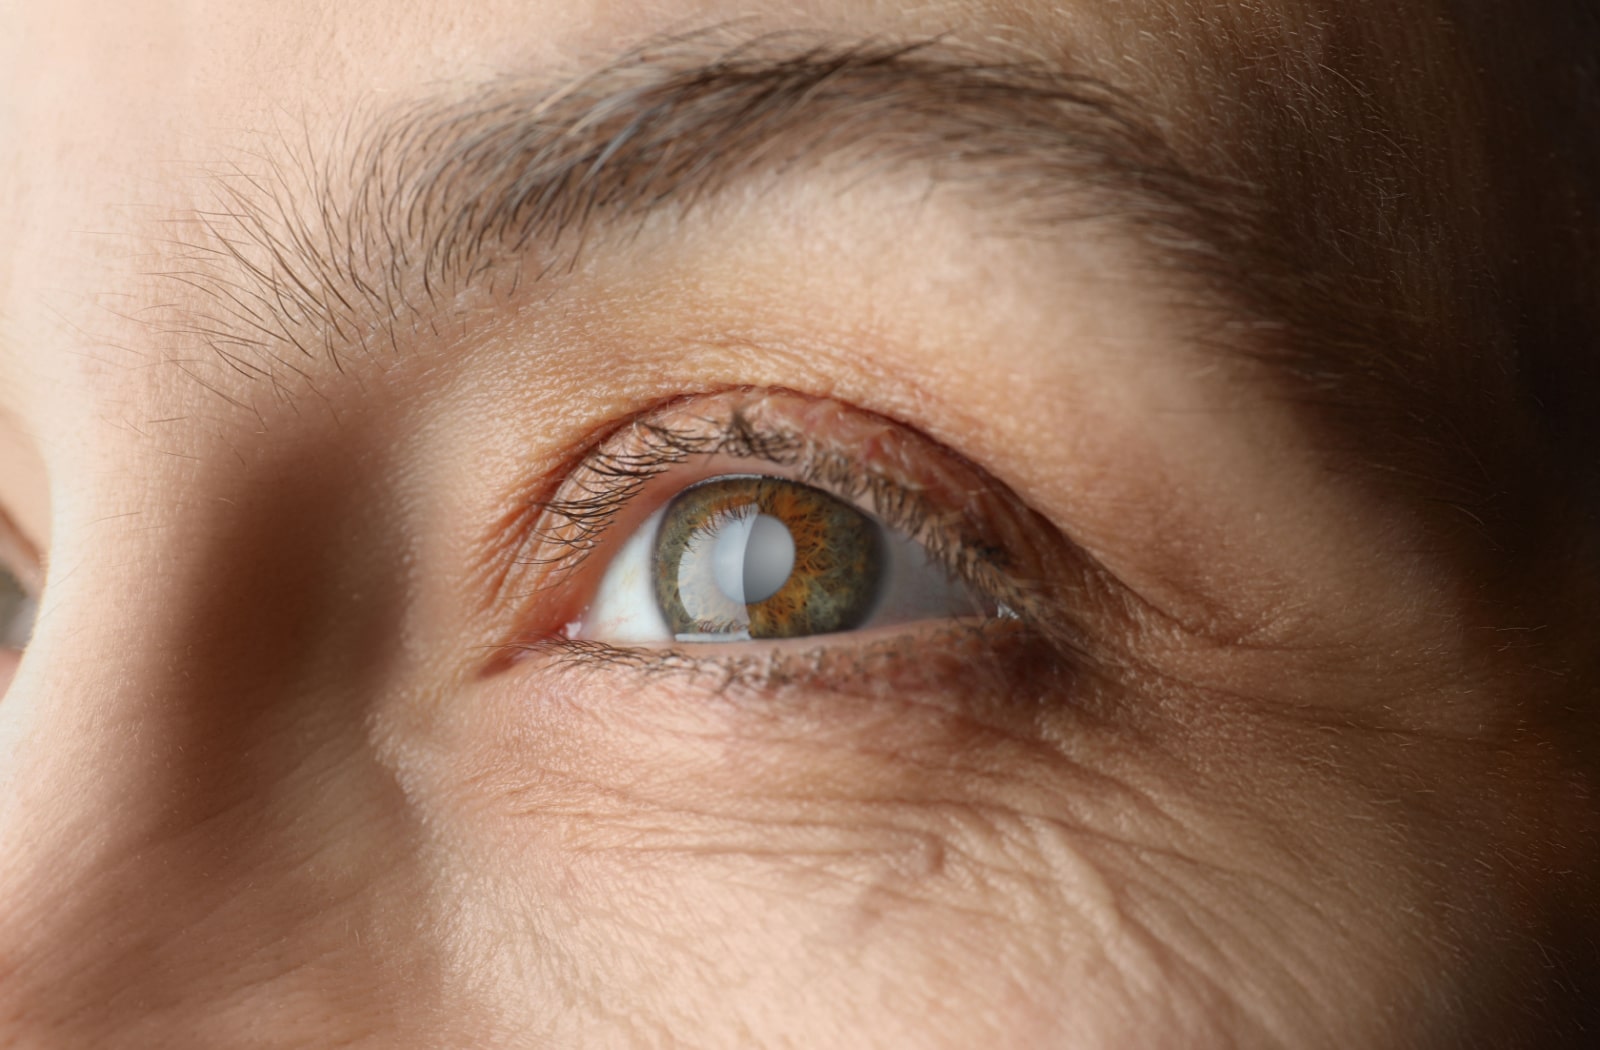 A close-up view of a woman with glaucoma